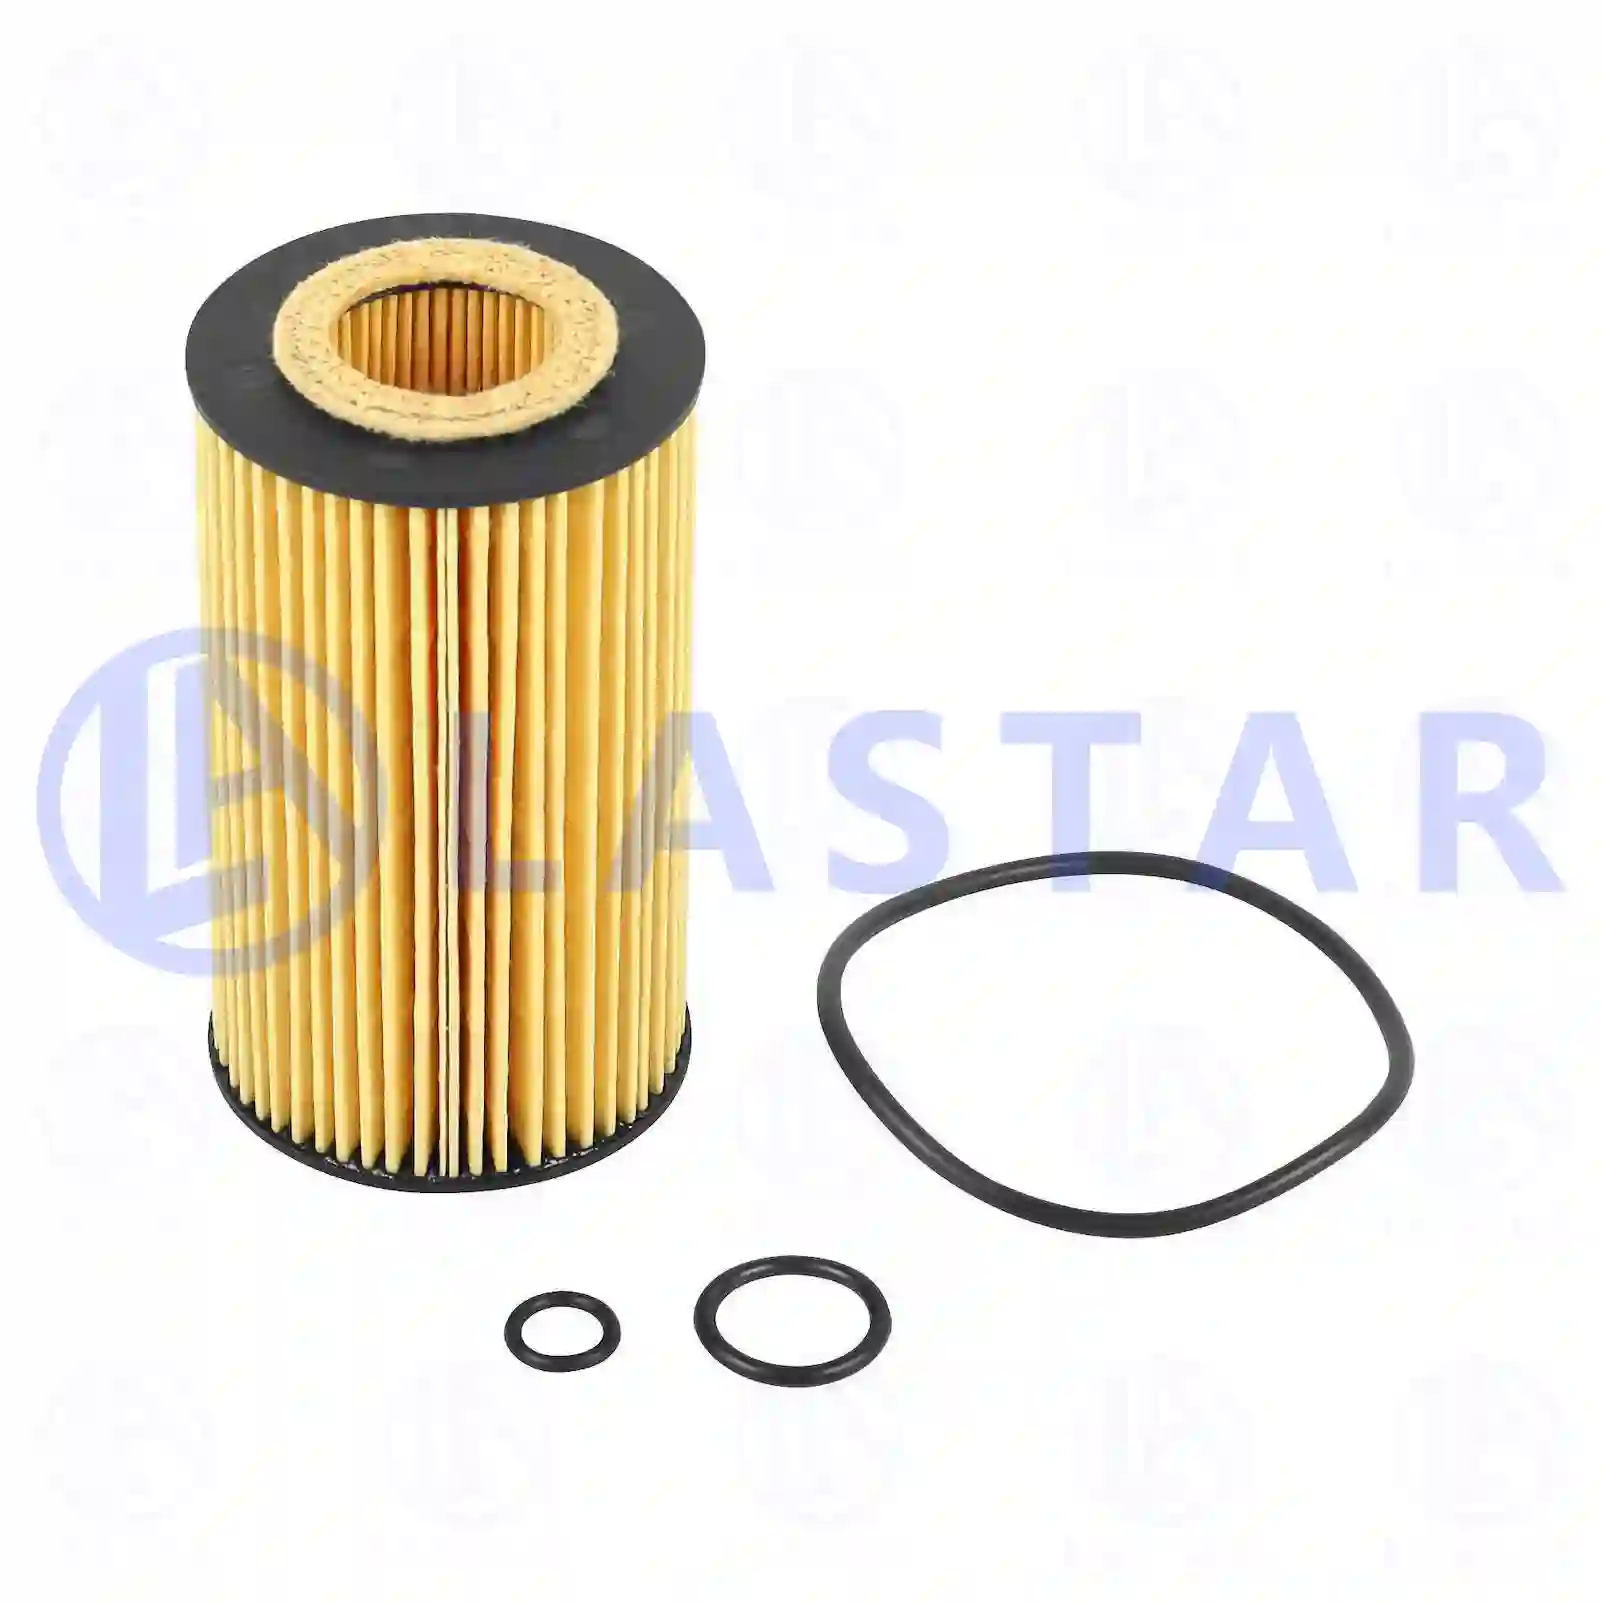 Oil Filter Oil filter insert, la no: 77702050 ,  oem no:X625, 5080244AB, 5086301AA, 5102904AA, 5102905AA, 5102905AB, 51022905AA, 5143064AA, 5179103AA, 5183748AA, 71775180, K05102904AA, K05102905AA, K05102905AB, K05143064AA, 5086301AA, 5102905AB, 42540021A, 5086301AA, 5102905AB, 0001802209, 0001802309, 0001802609, 0001803009, 0001803109, 0001803309, 1121800009, 112180000967, 1121840025, 1121840125, 1121840225, 1121840325, 1121840525, 6111800009, 611180000967, 6111800010, 6111800110, 6111800210, 6641800009, 1121800009 Lastar Spare Part | Truck Spare Parts, Auotomotive Spare Parts